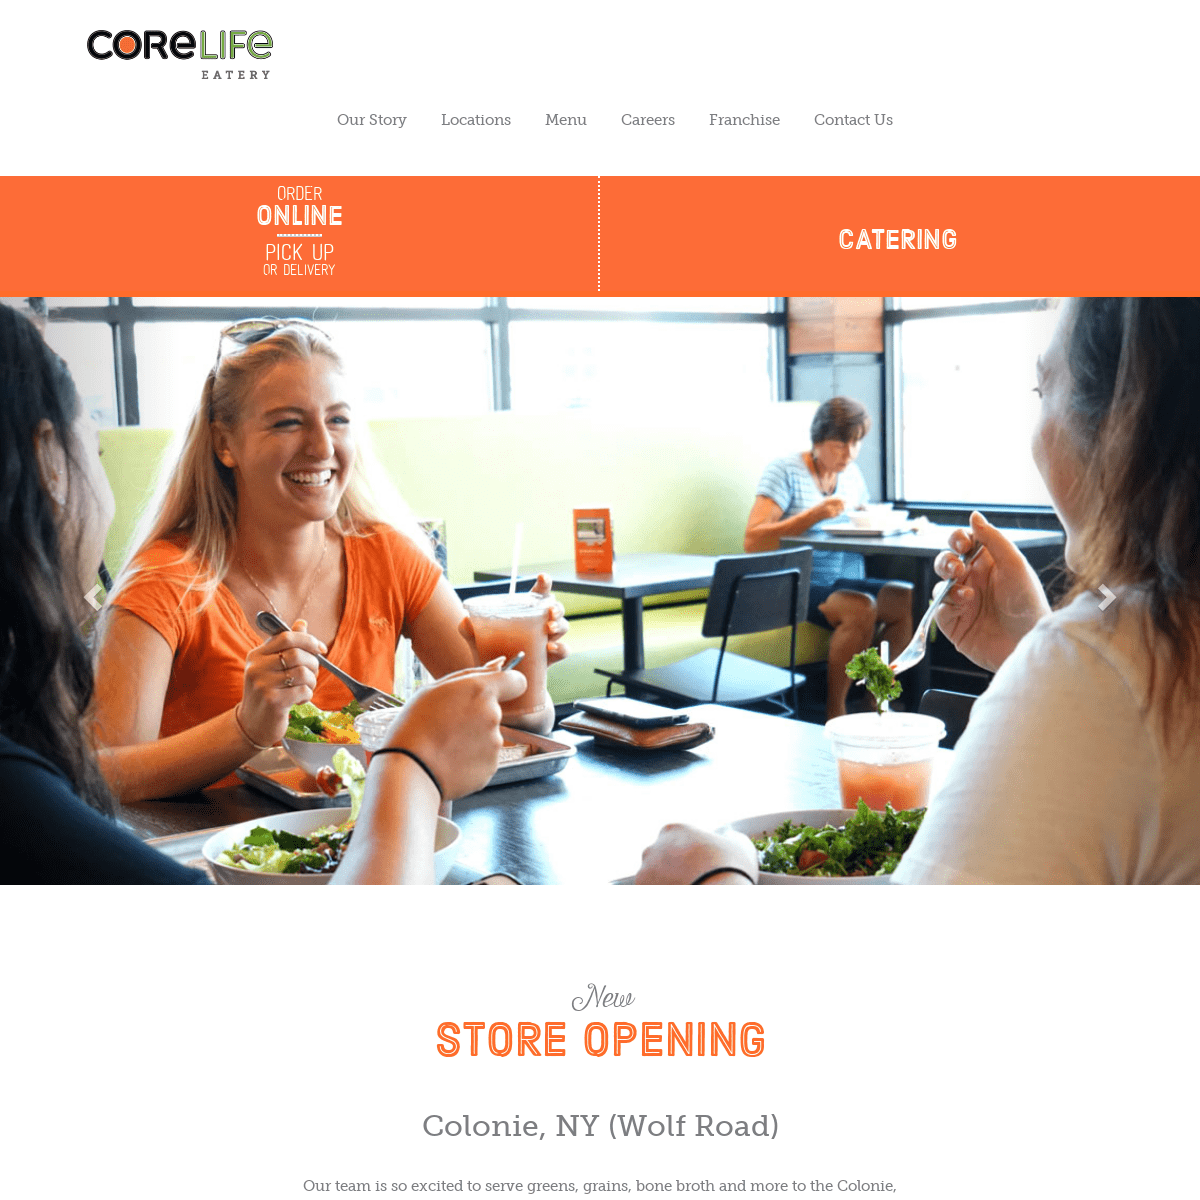 A complete backup of corelifeeatery.com